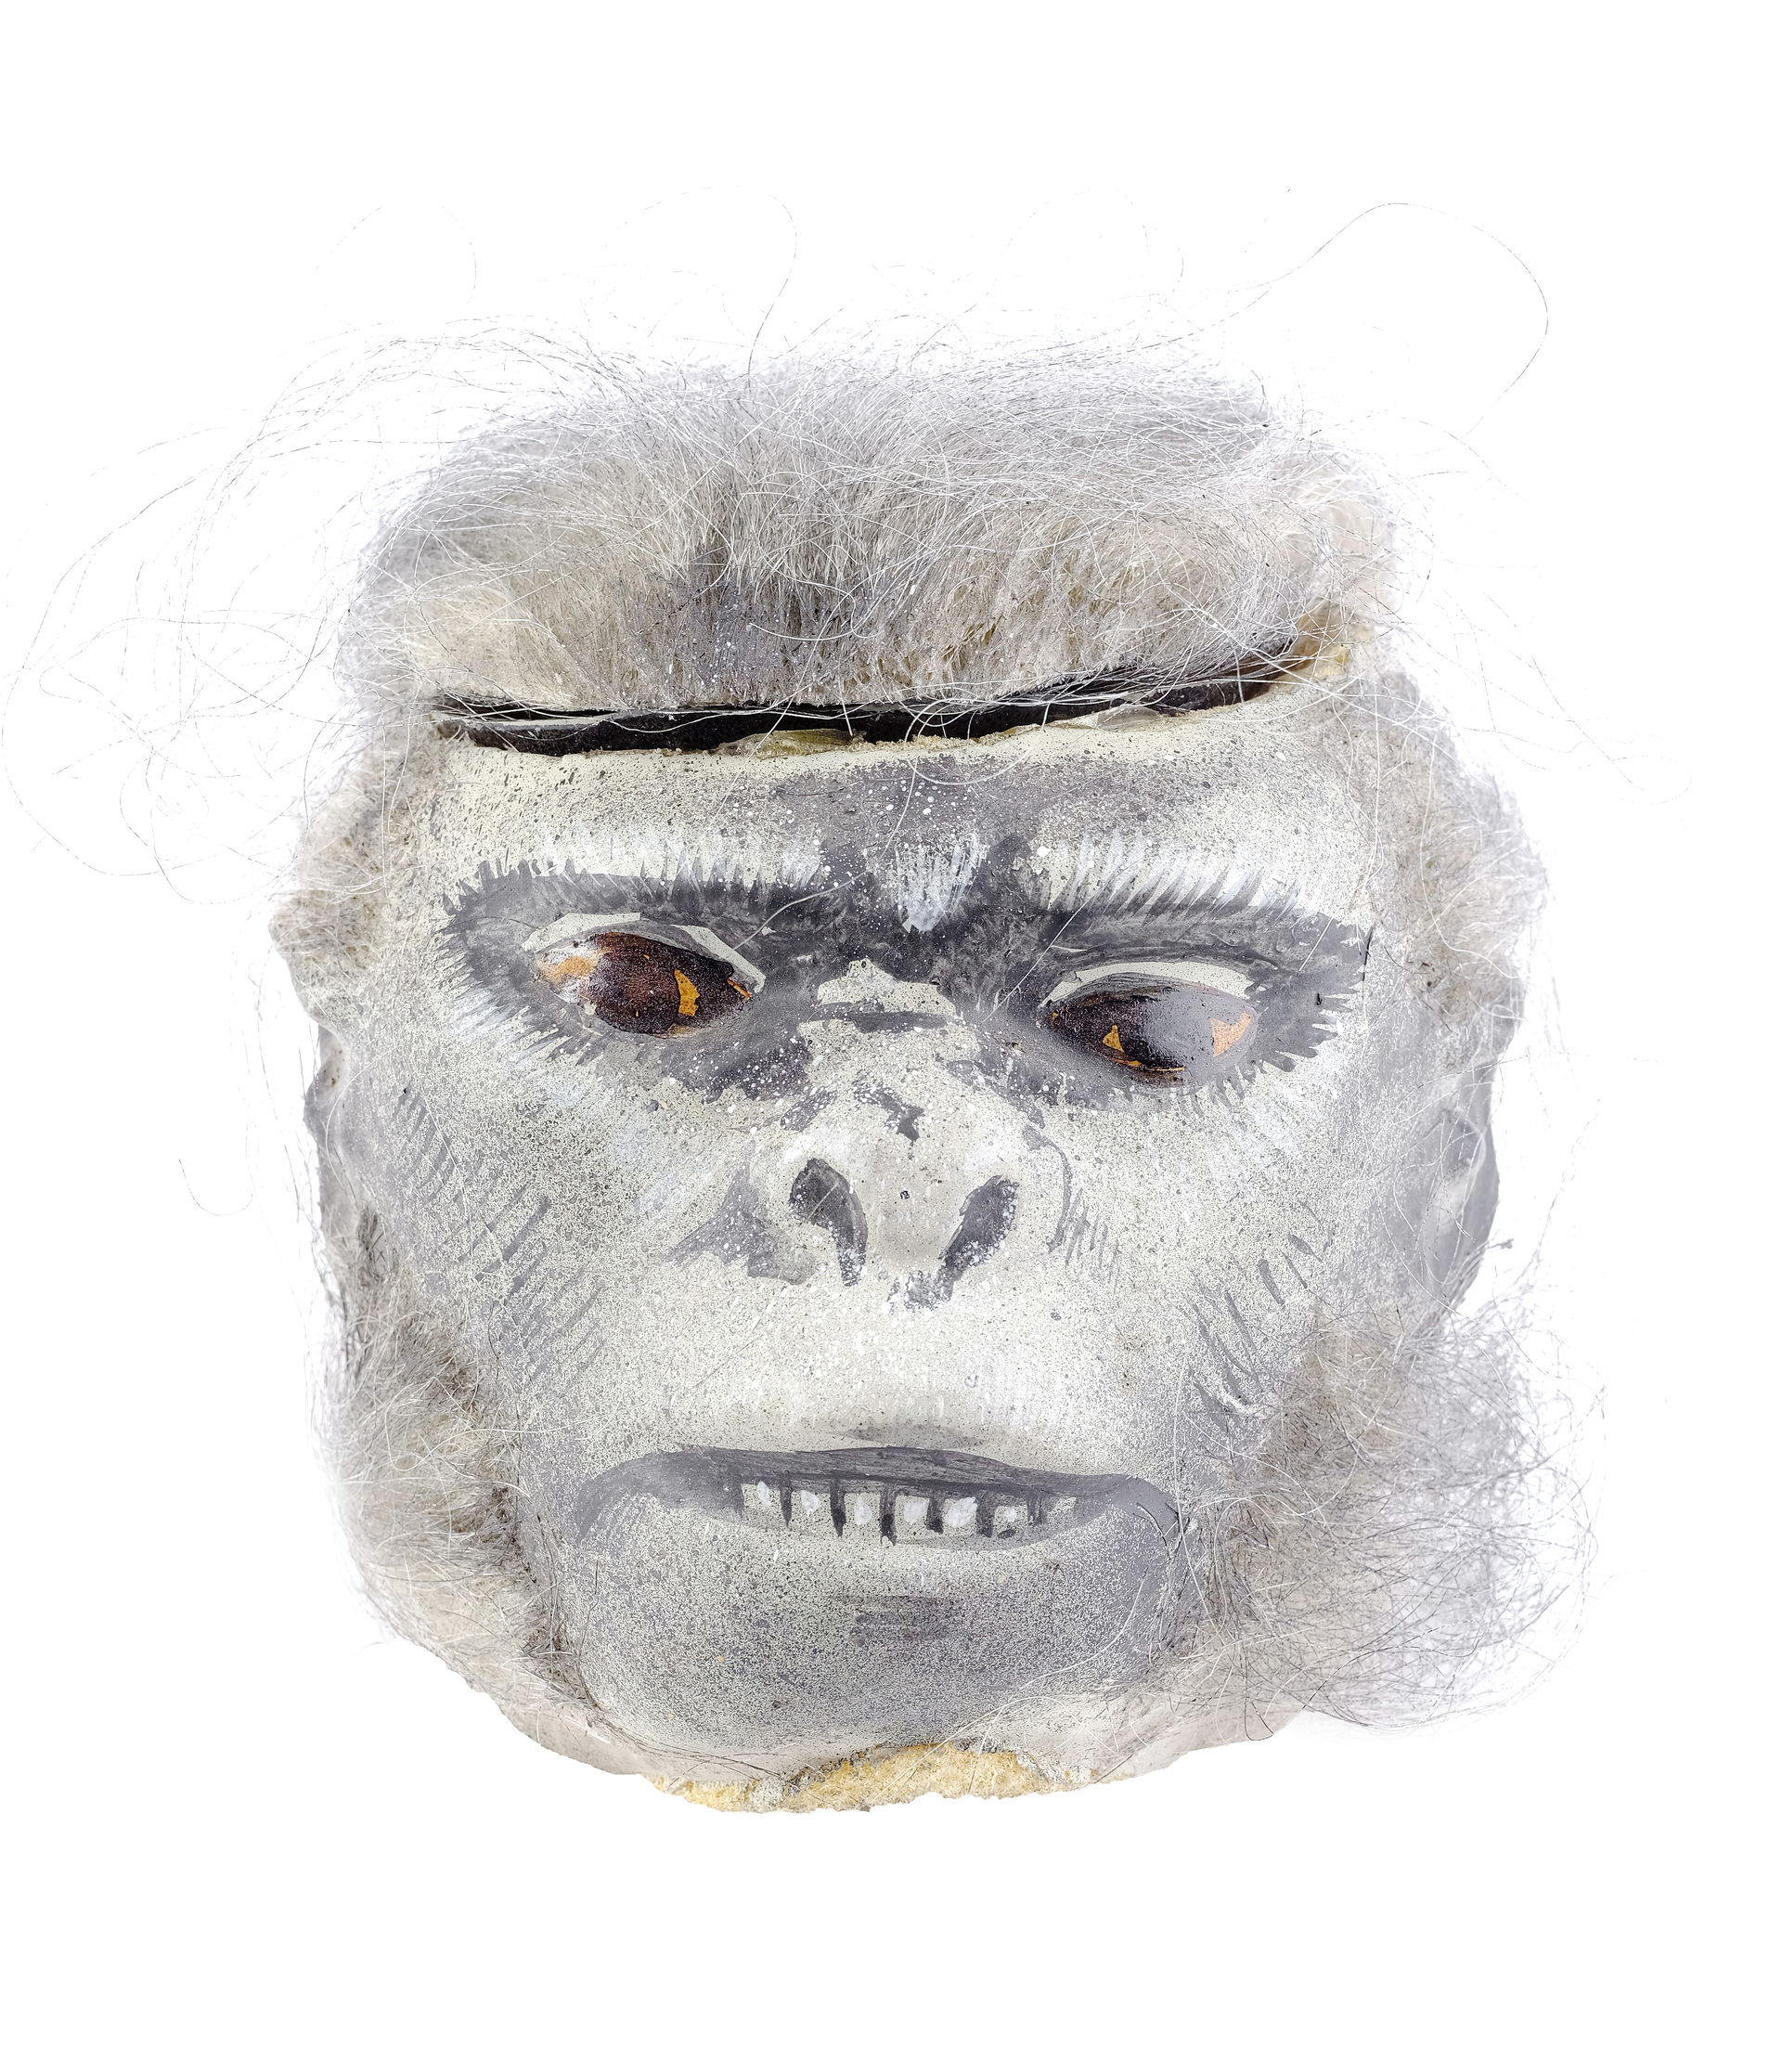 INDIANA JONES AND THE TEMPLE OF DOOM - Chilled Monkey Brain Head